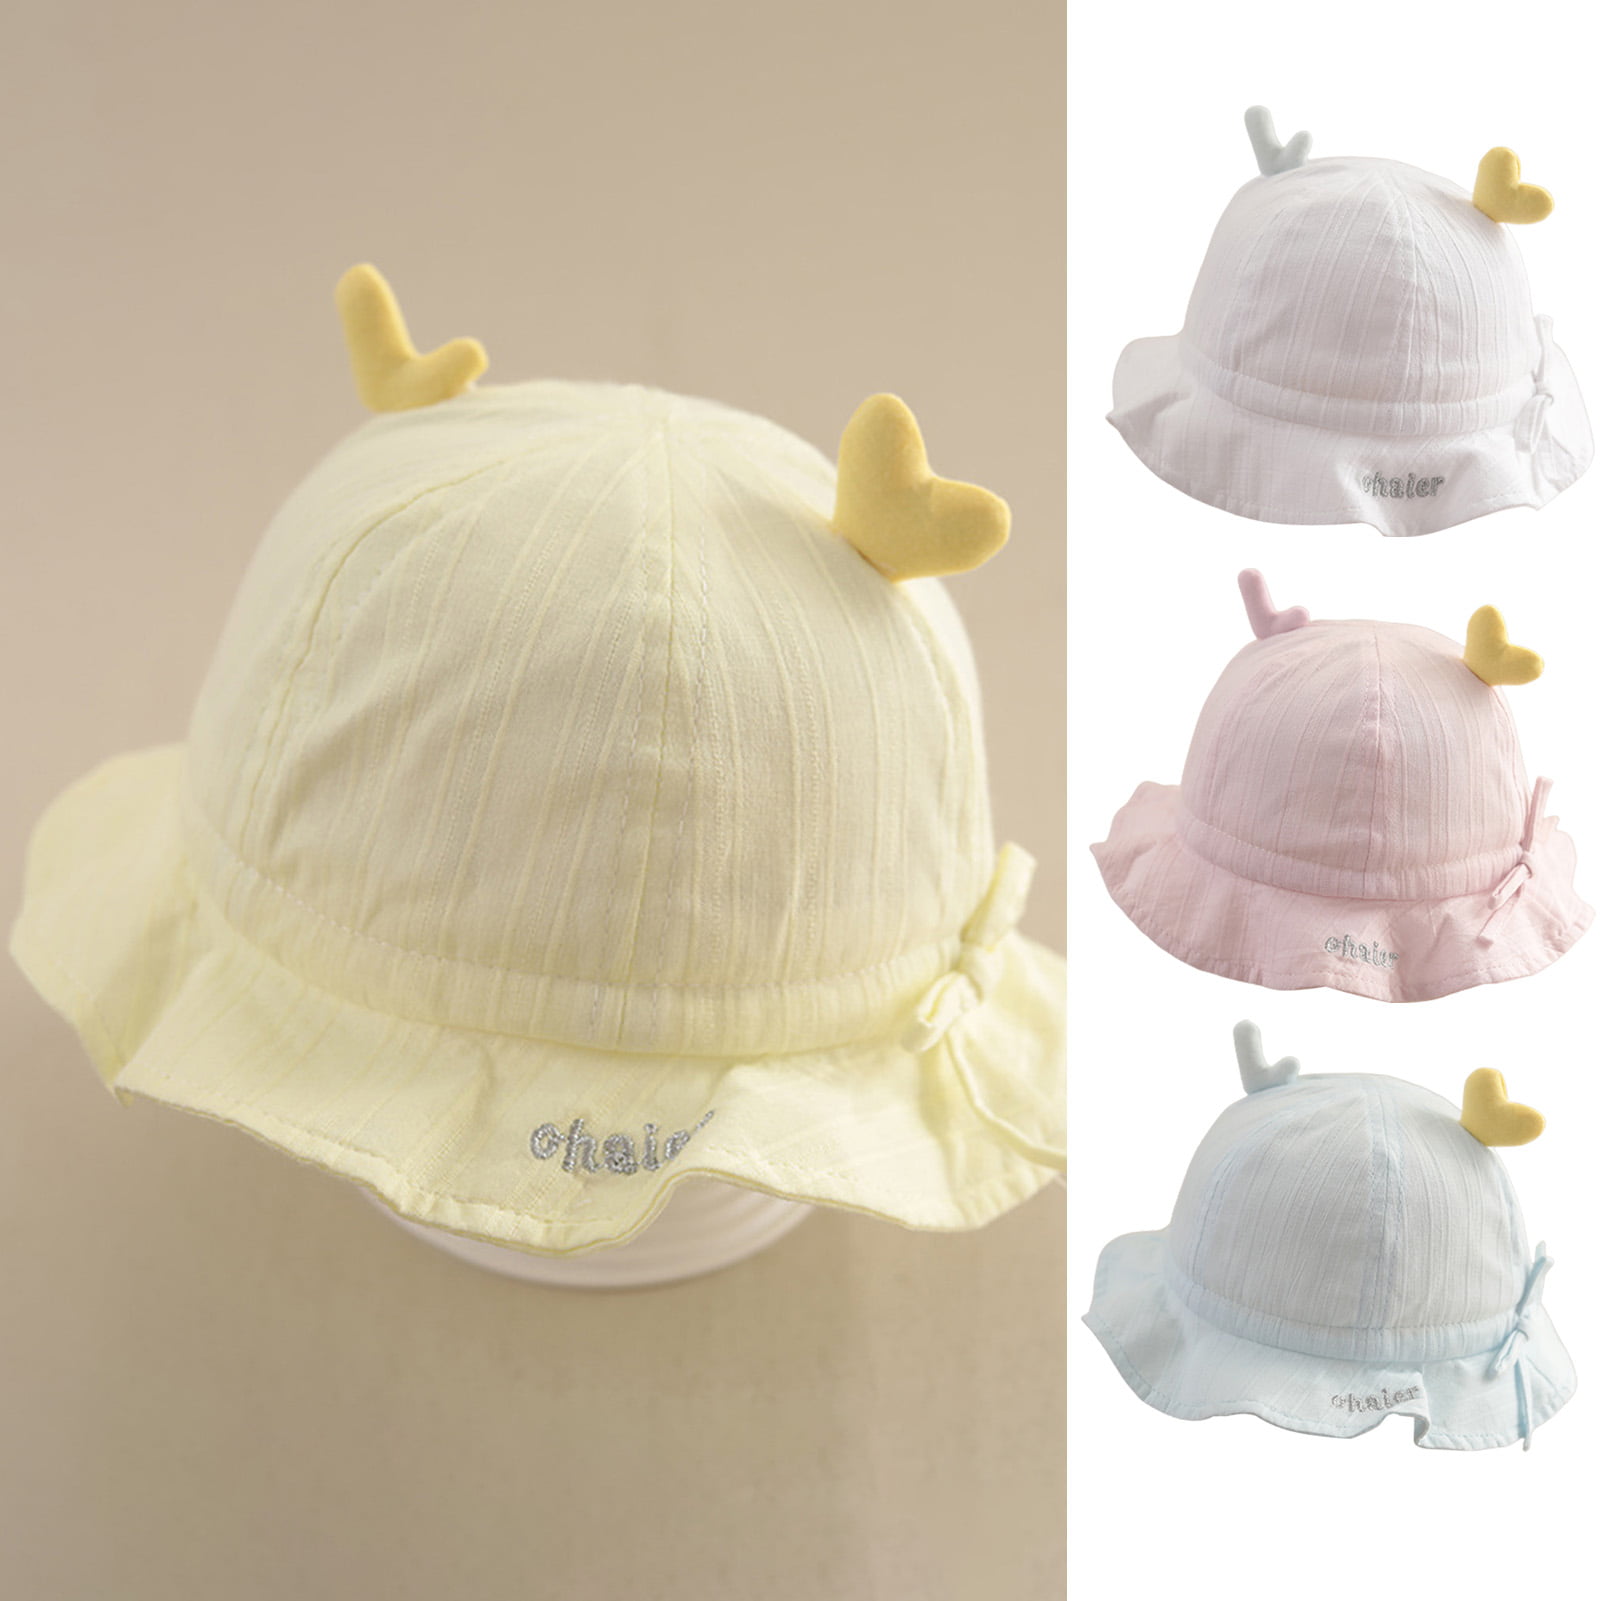 Baby Girls Sun Hat with Shiny Bow Summer Cotton Bucket Hats Boys Prince Embroidered Frilly Broderie Anglaise Bonnet Hat Tie Up Chin Strap 0-24 Months 